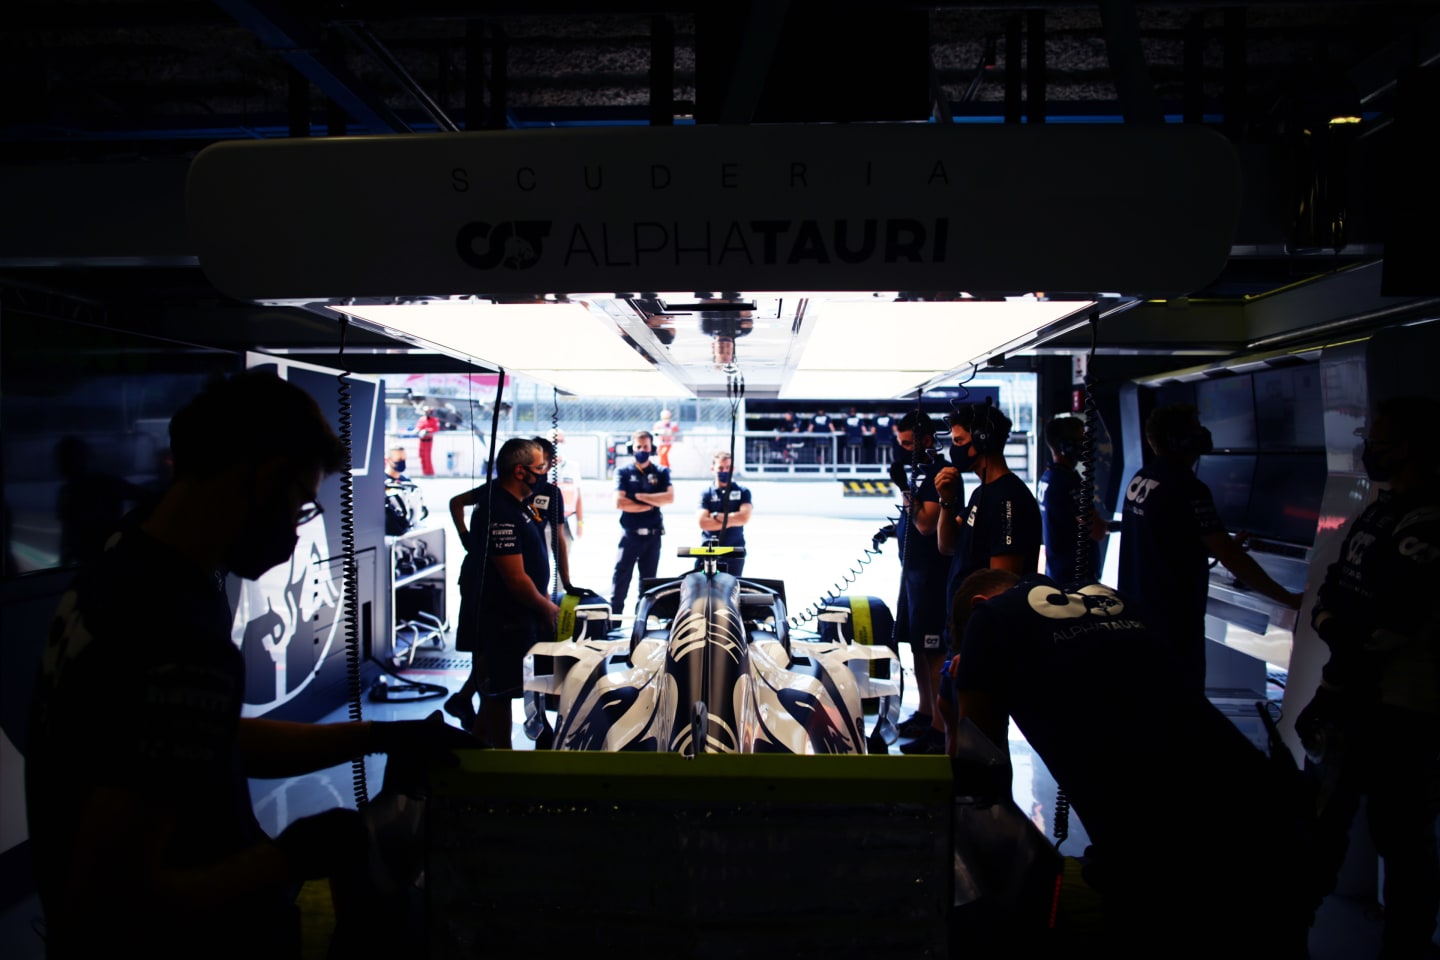 MONZA, ITALY - SEPTEMBER 04: Pierre Gasly of France and Scuderia AlphaTauri waits in the garage during practice for the F1 Grand Prix of Italy at Autodromo di Monza on September 04, 2020 in Monza, Italy. (Photo by Peter Fox/Getty Images)